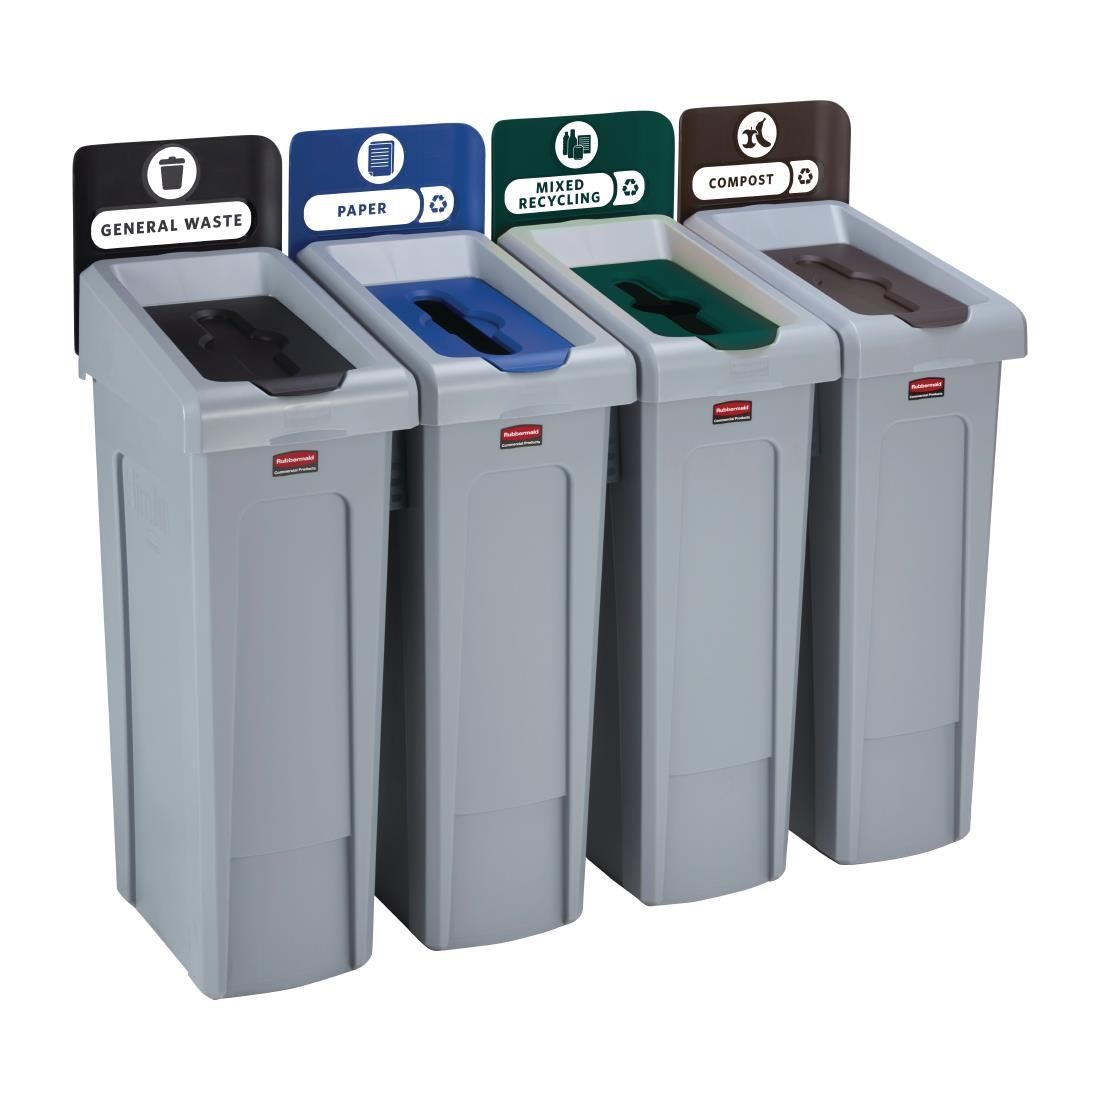 DY081 Rubbermaid Slim Jim Four Stream Recycling Station 87Ltr